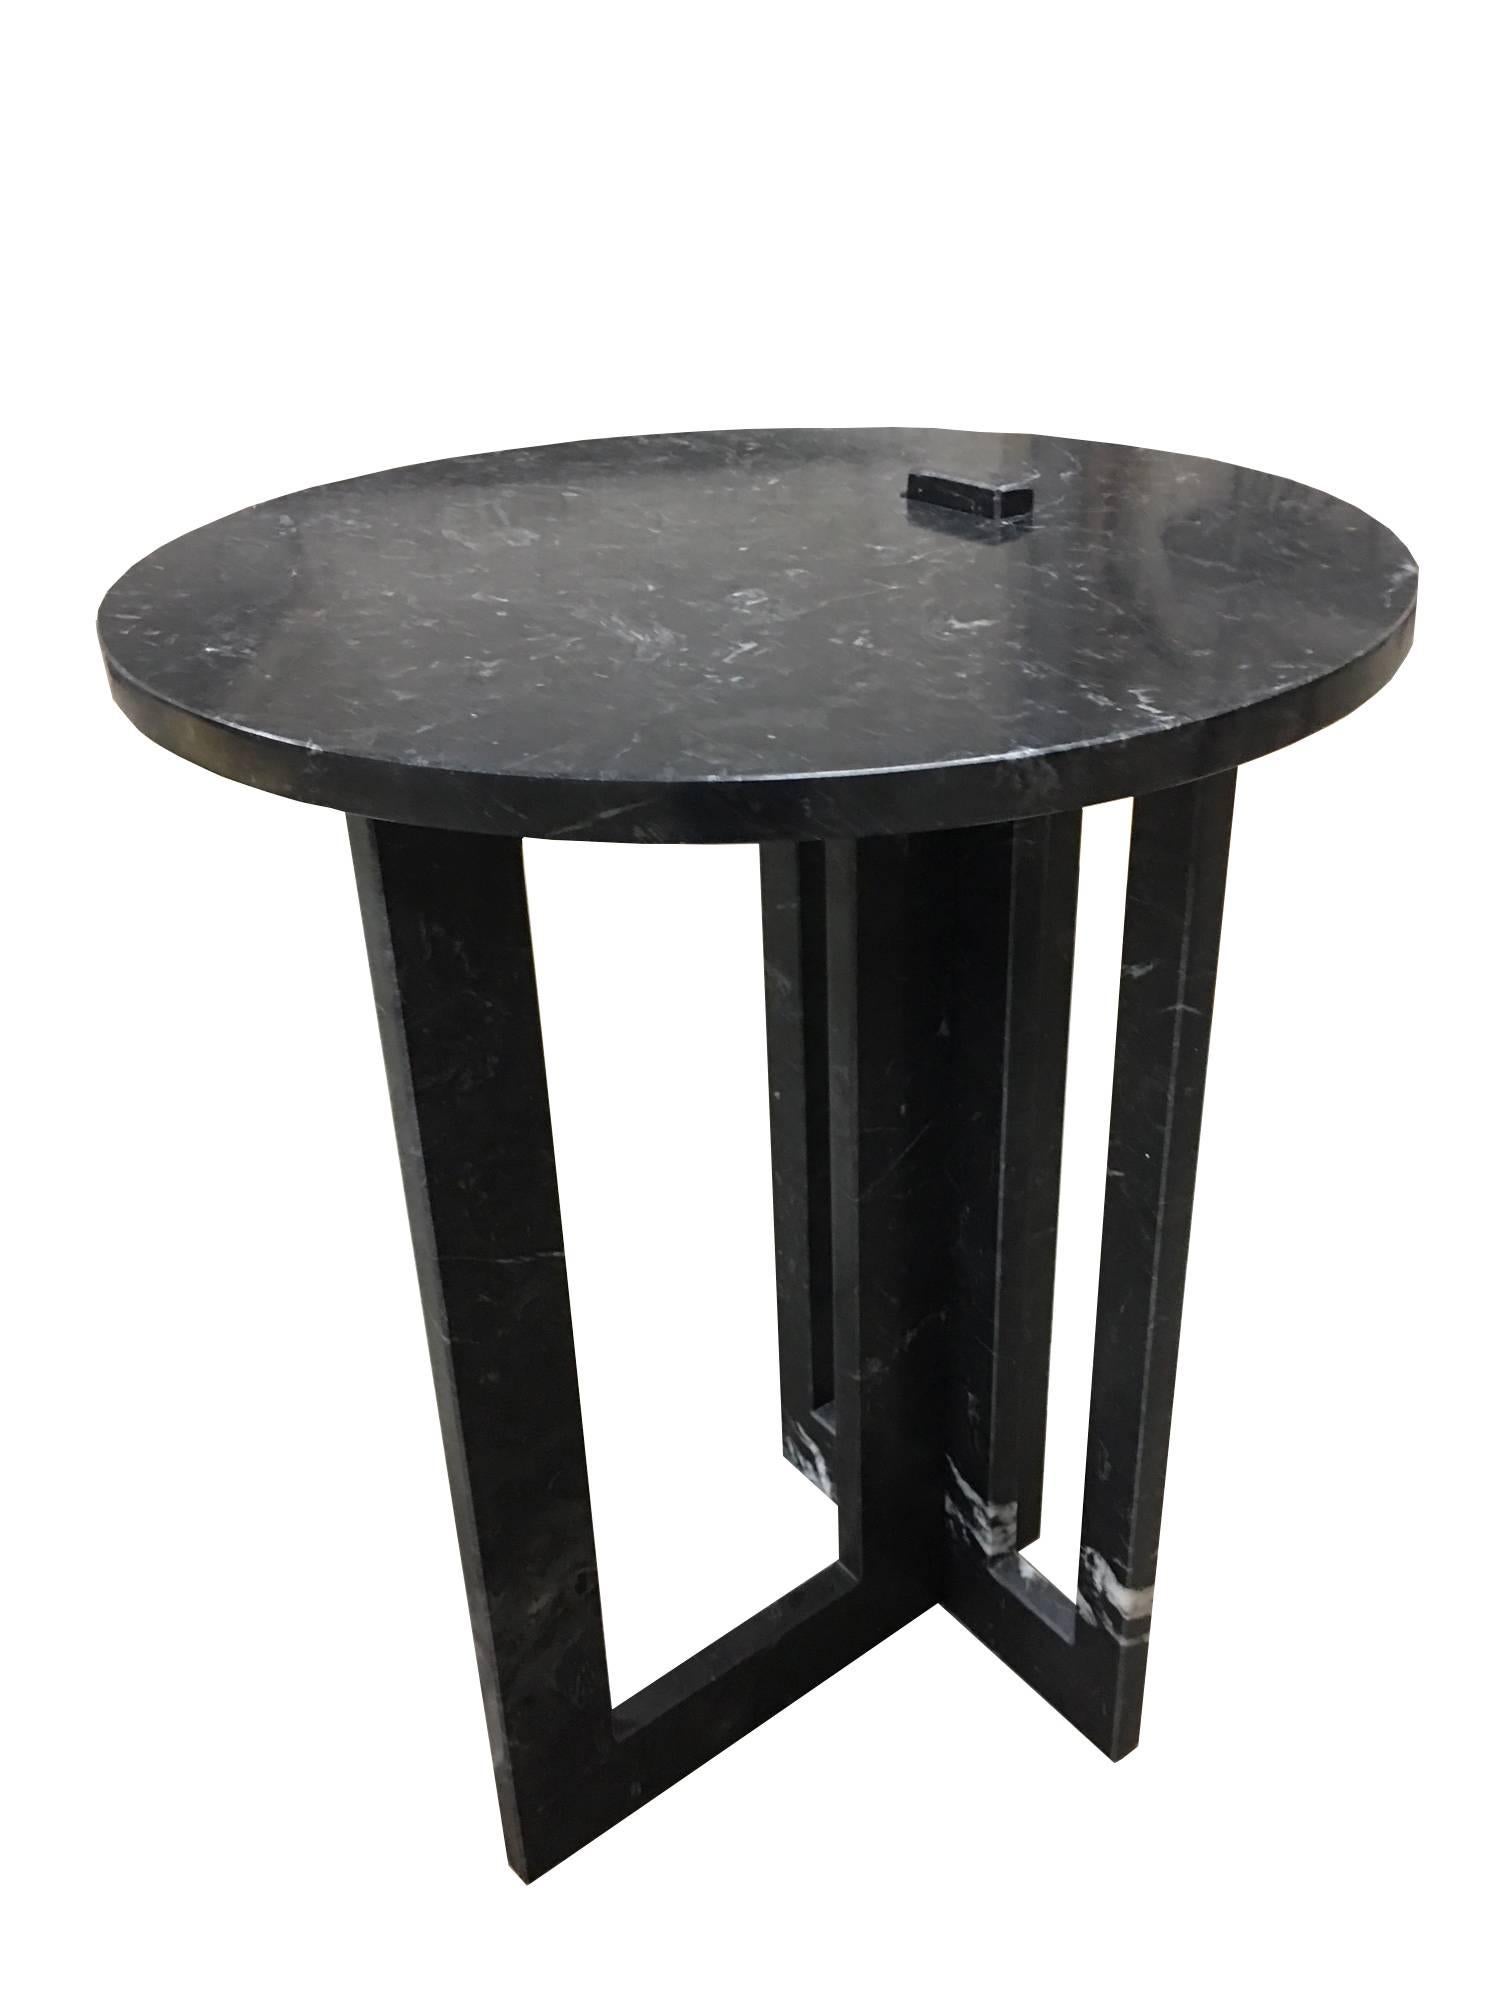 Hand-Crafted Pair of Italian Modern Black Marble Side Tables by Massimo Mangiardi For Sale